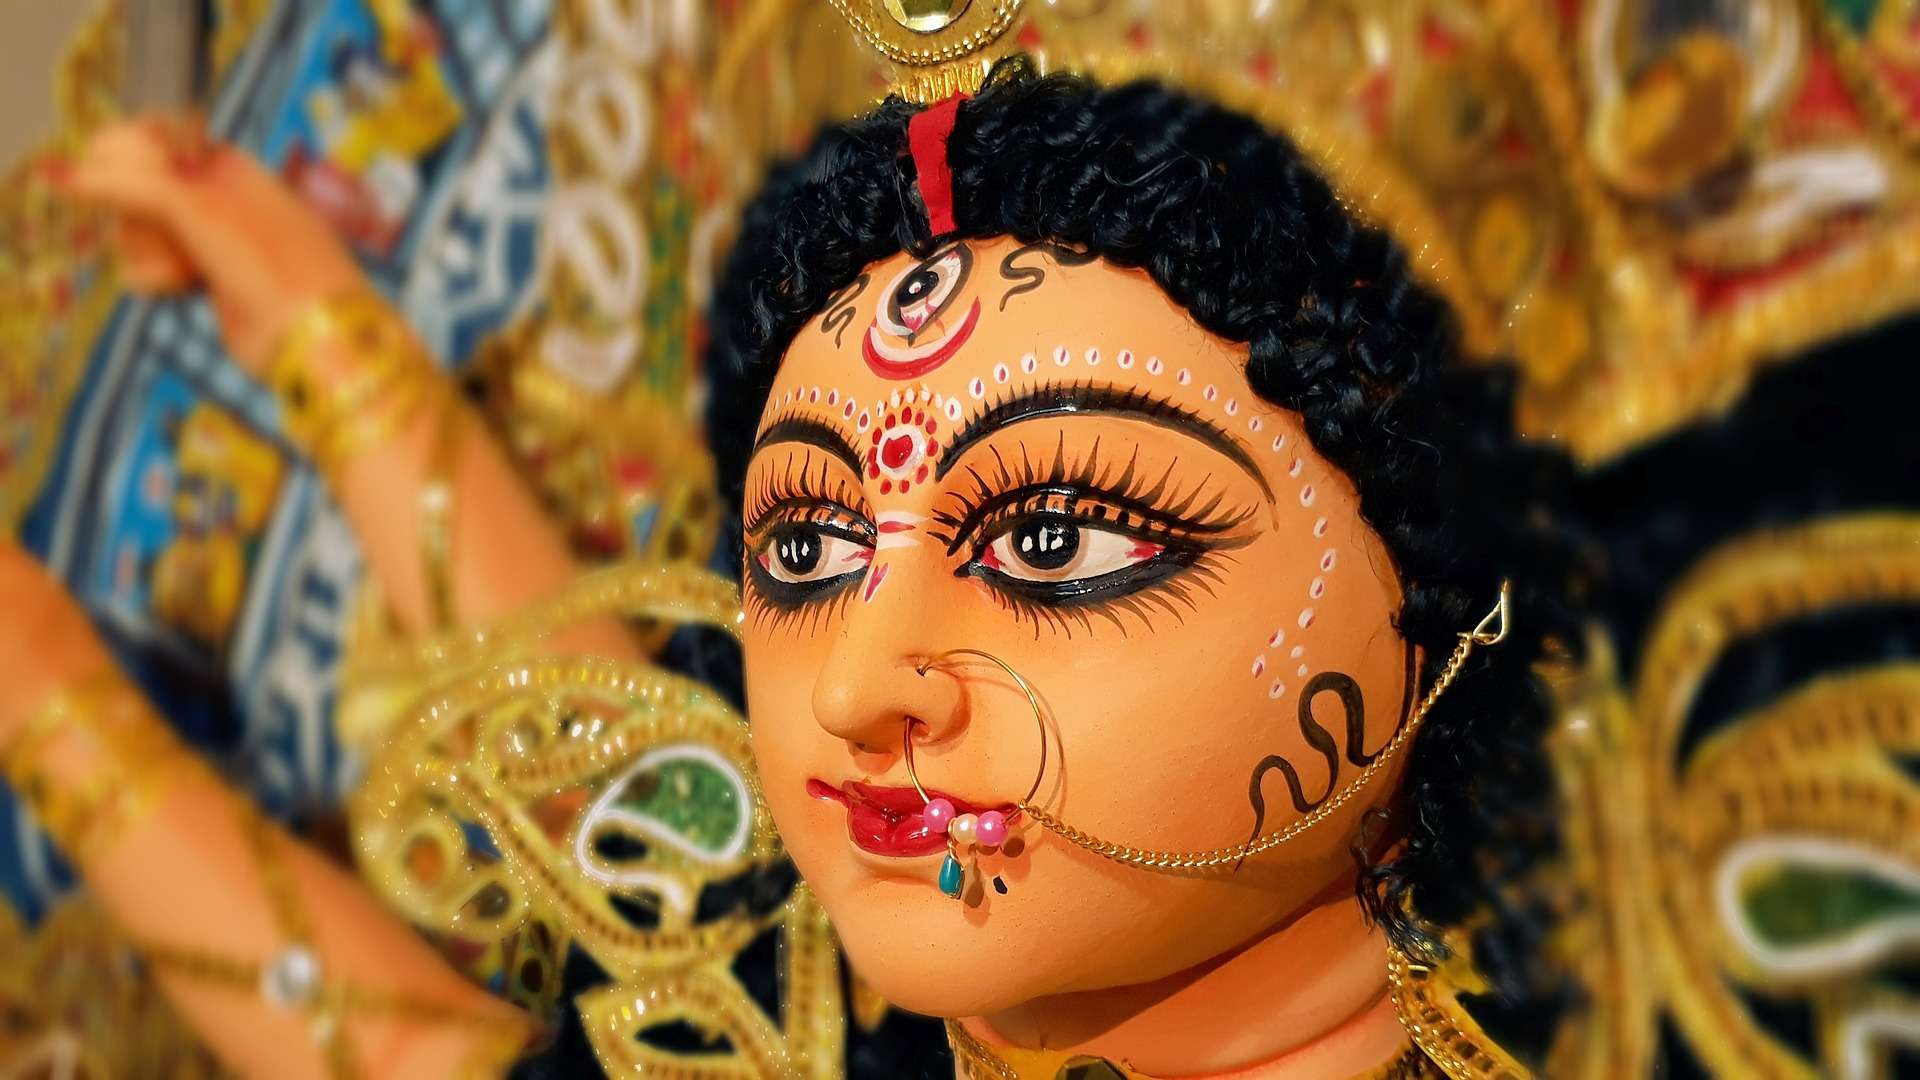 Unknown Facts About The Power, Maa Durga of India